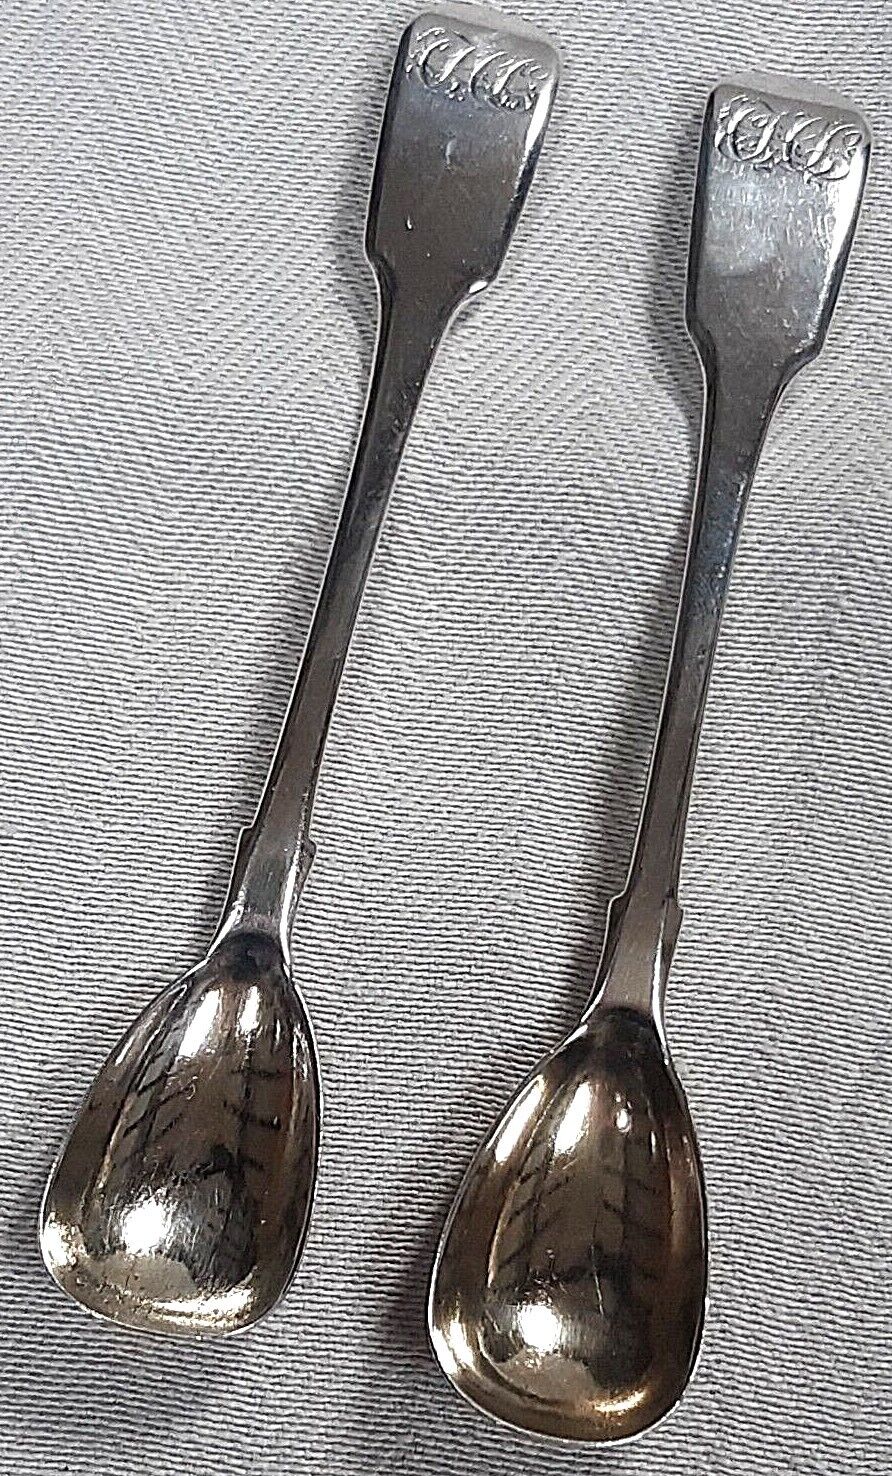 Fabulous Pair of William IV Exeter Sterling Silver Mustard Spoons Bristol 1833